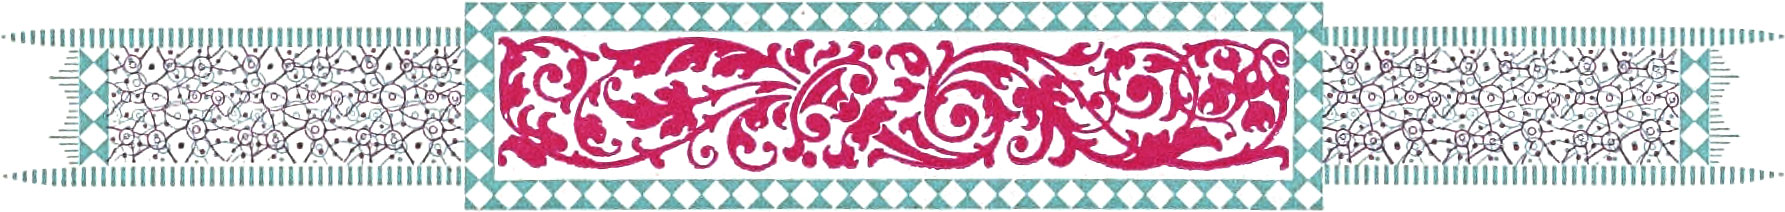 Ornate border comprising magenta and teal colors